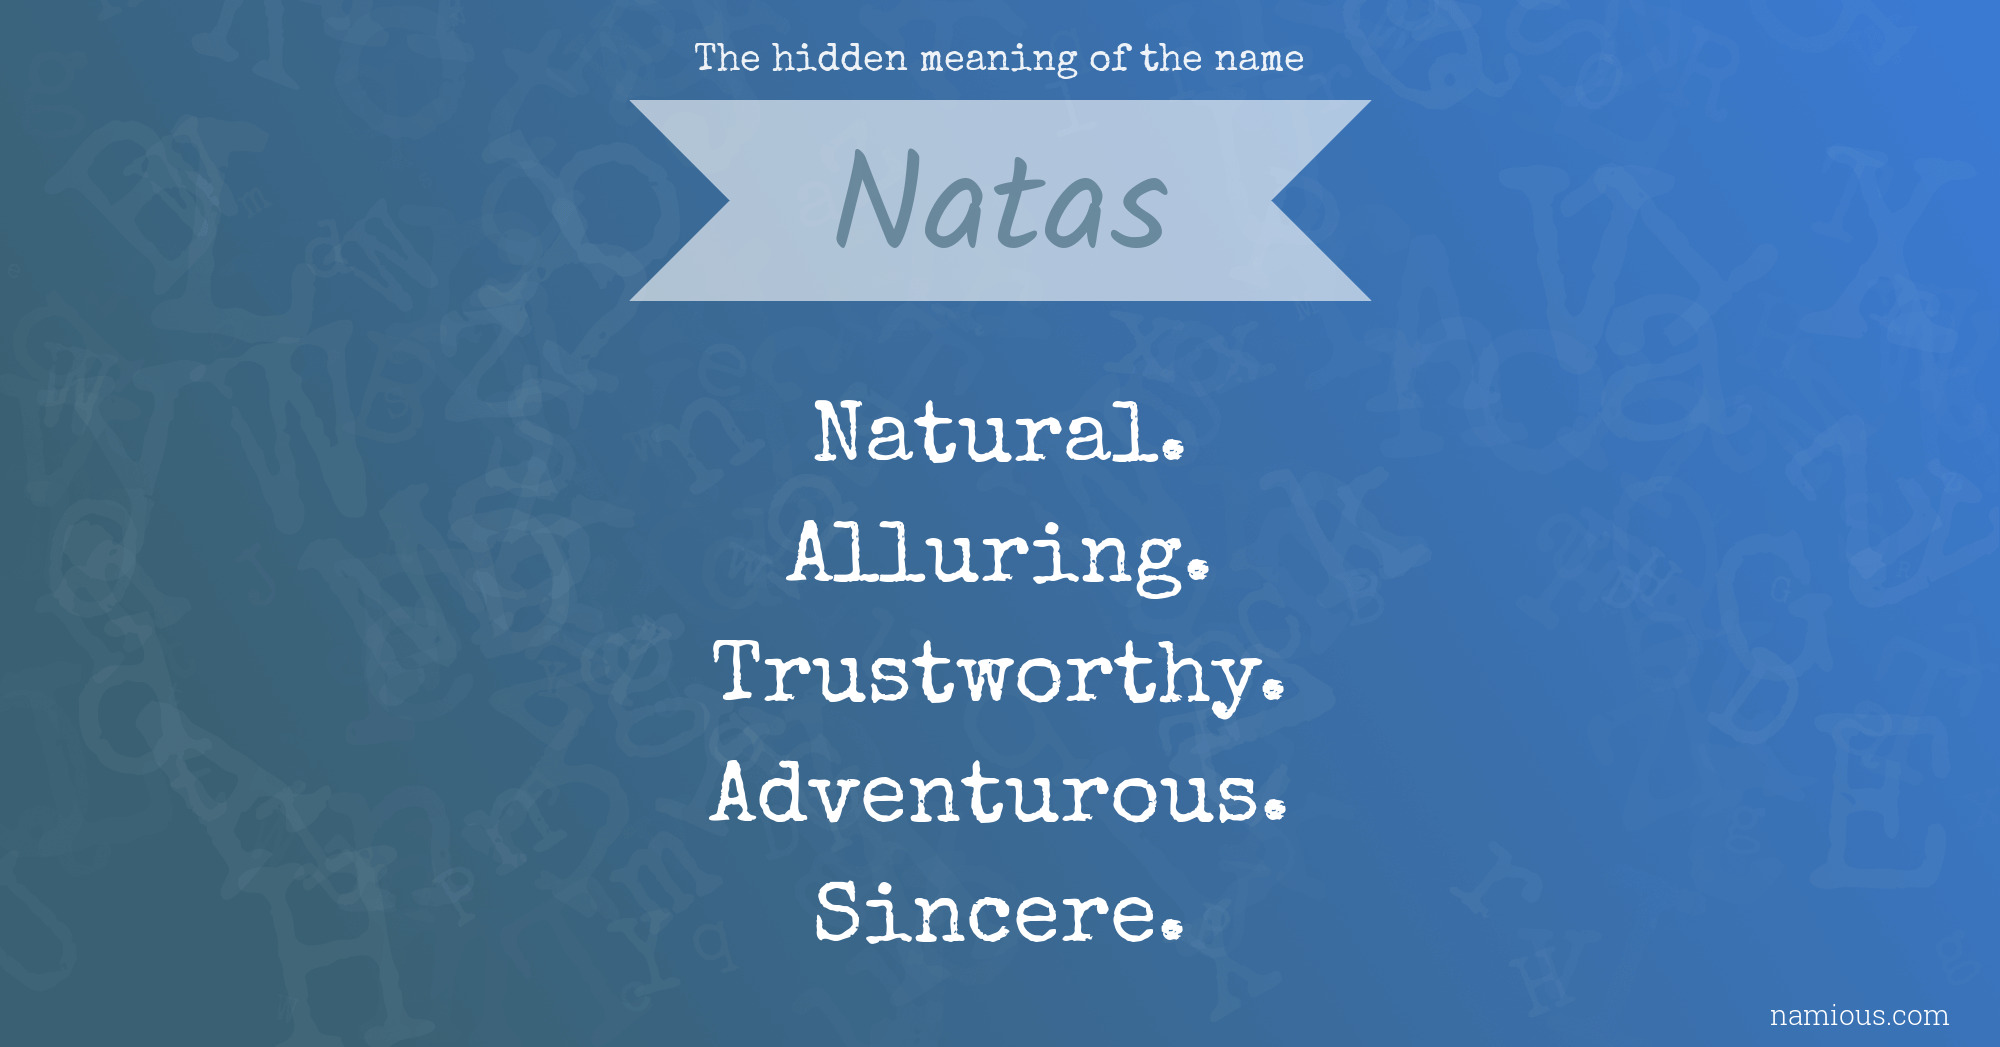 The hidden meaning of the name Natas